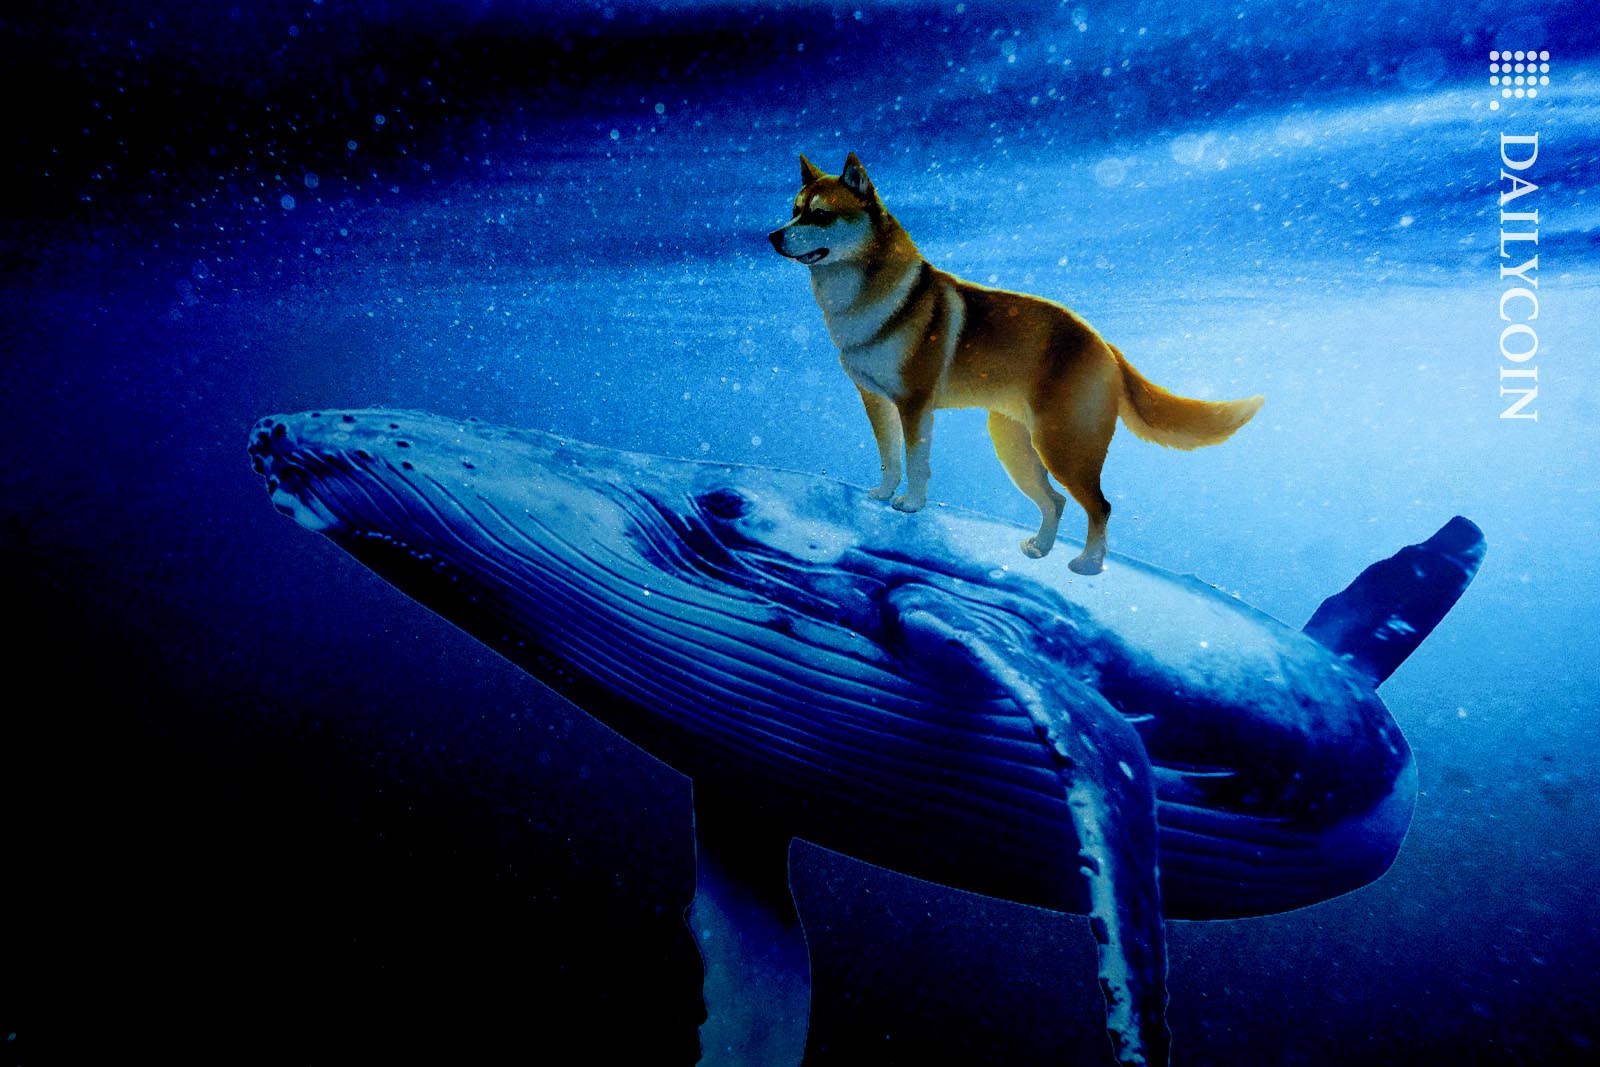 Shiba Inu riding a whale under water.